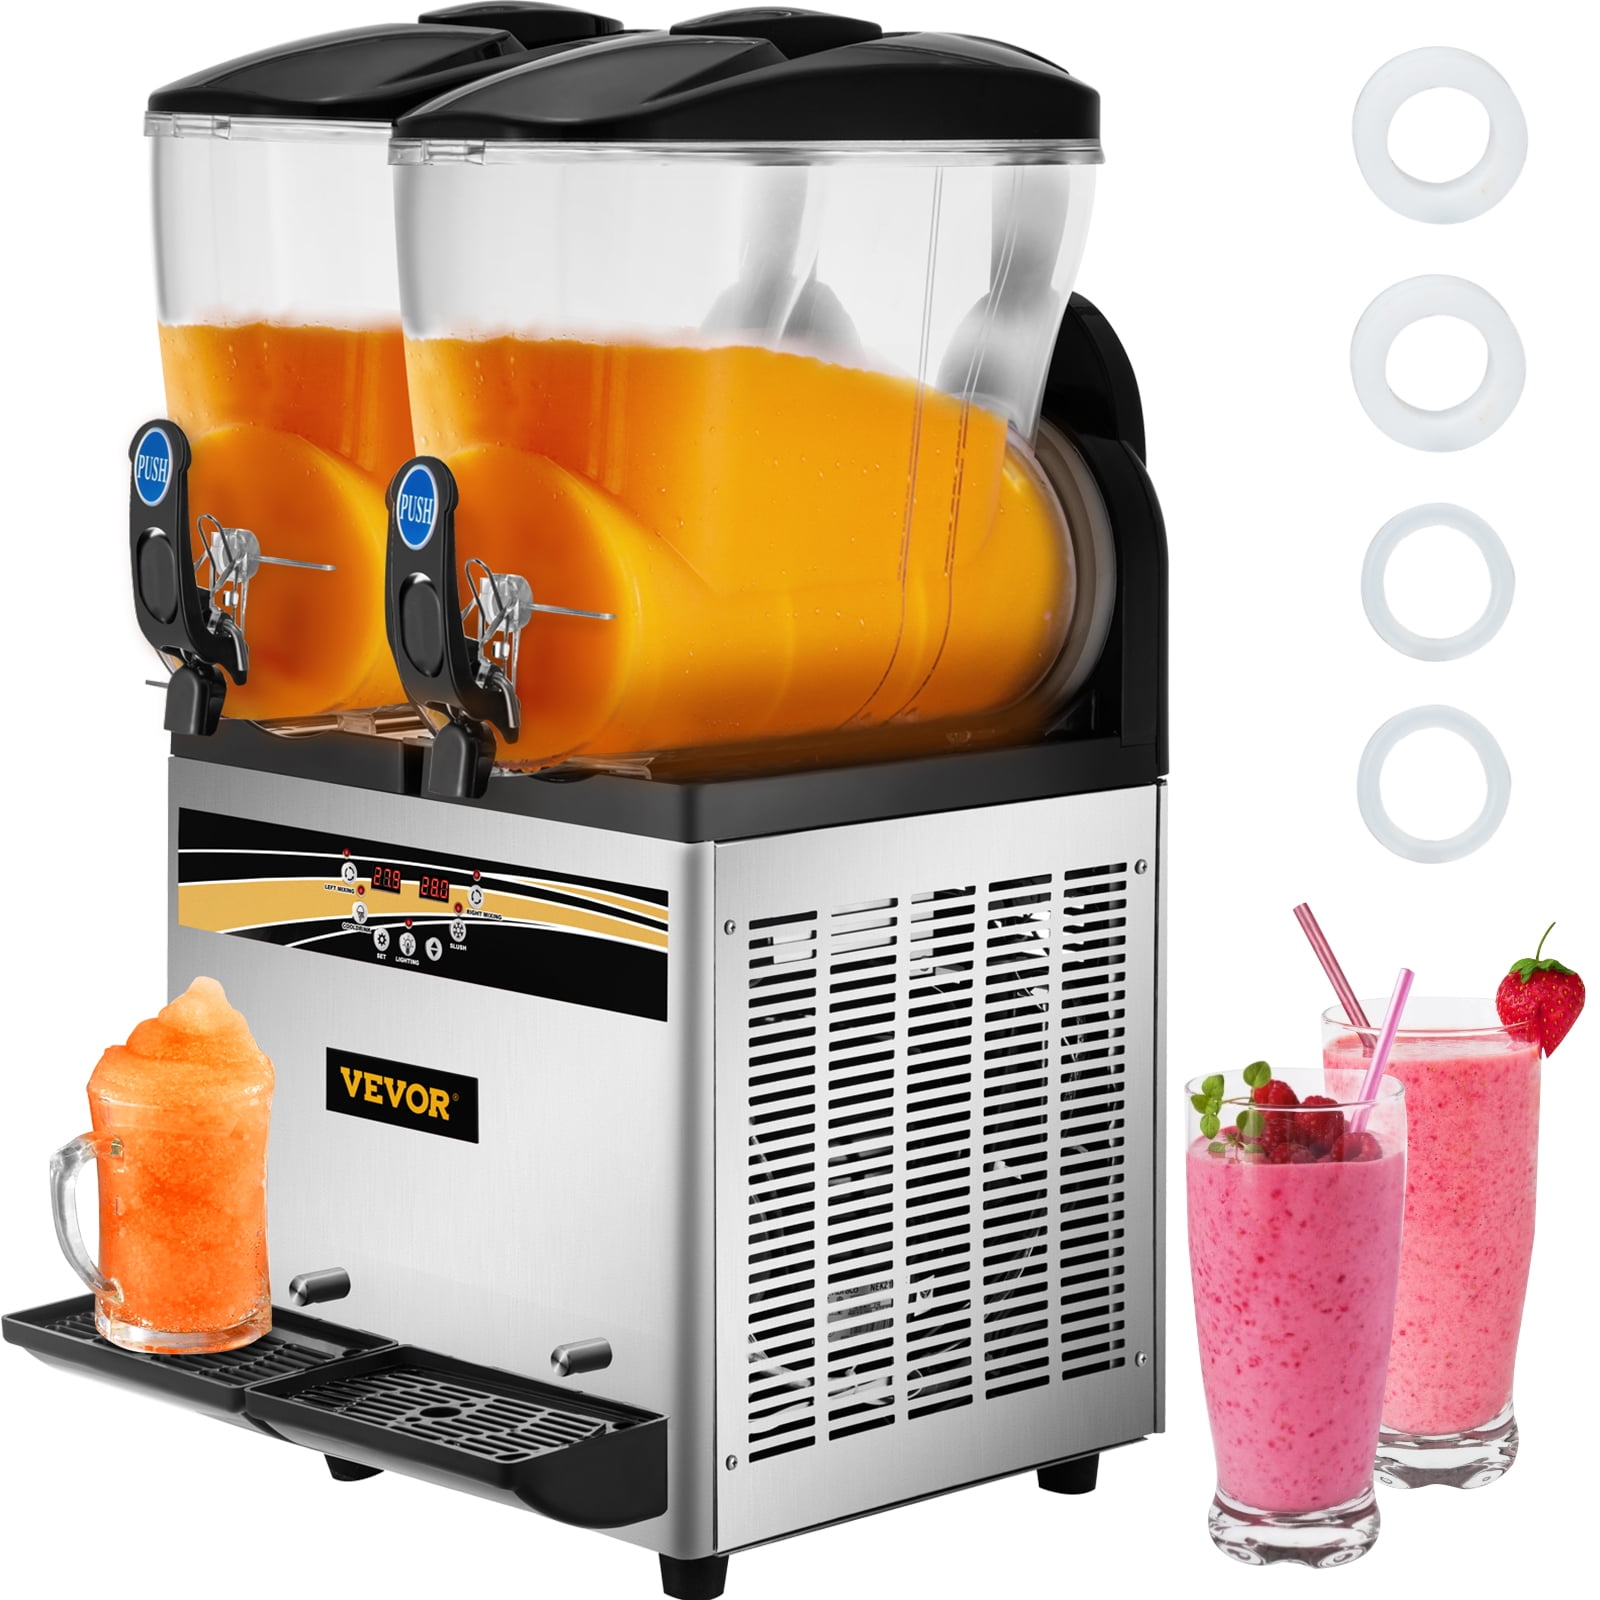 Commercial Slushy Machine 300W 2.5L x 2 Tank Stainless Steel Margarita Smoothie Frozen Drink Maker Perfect for Ice Juice Tea Coffee Making 